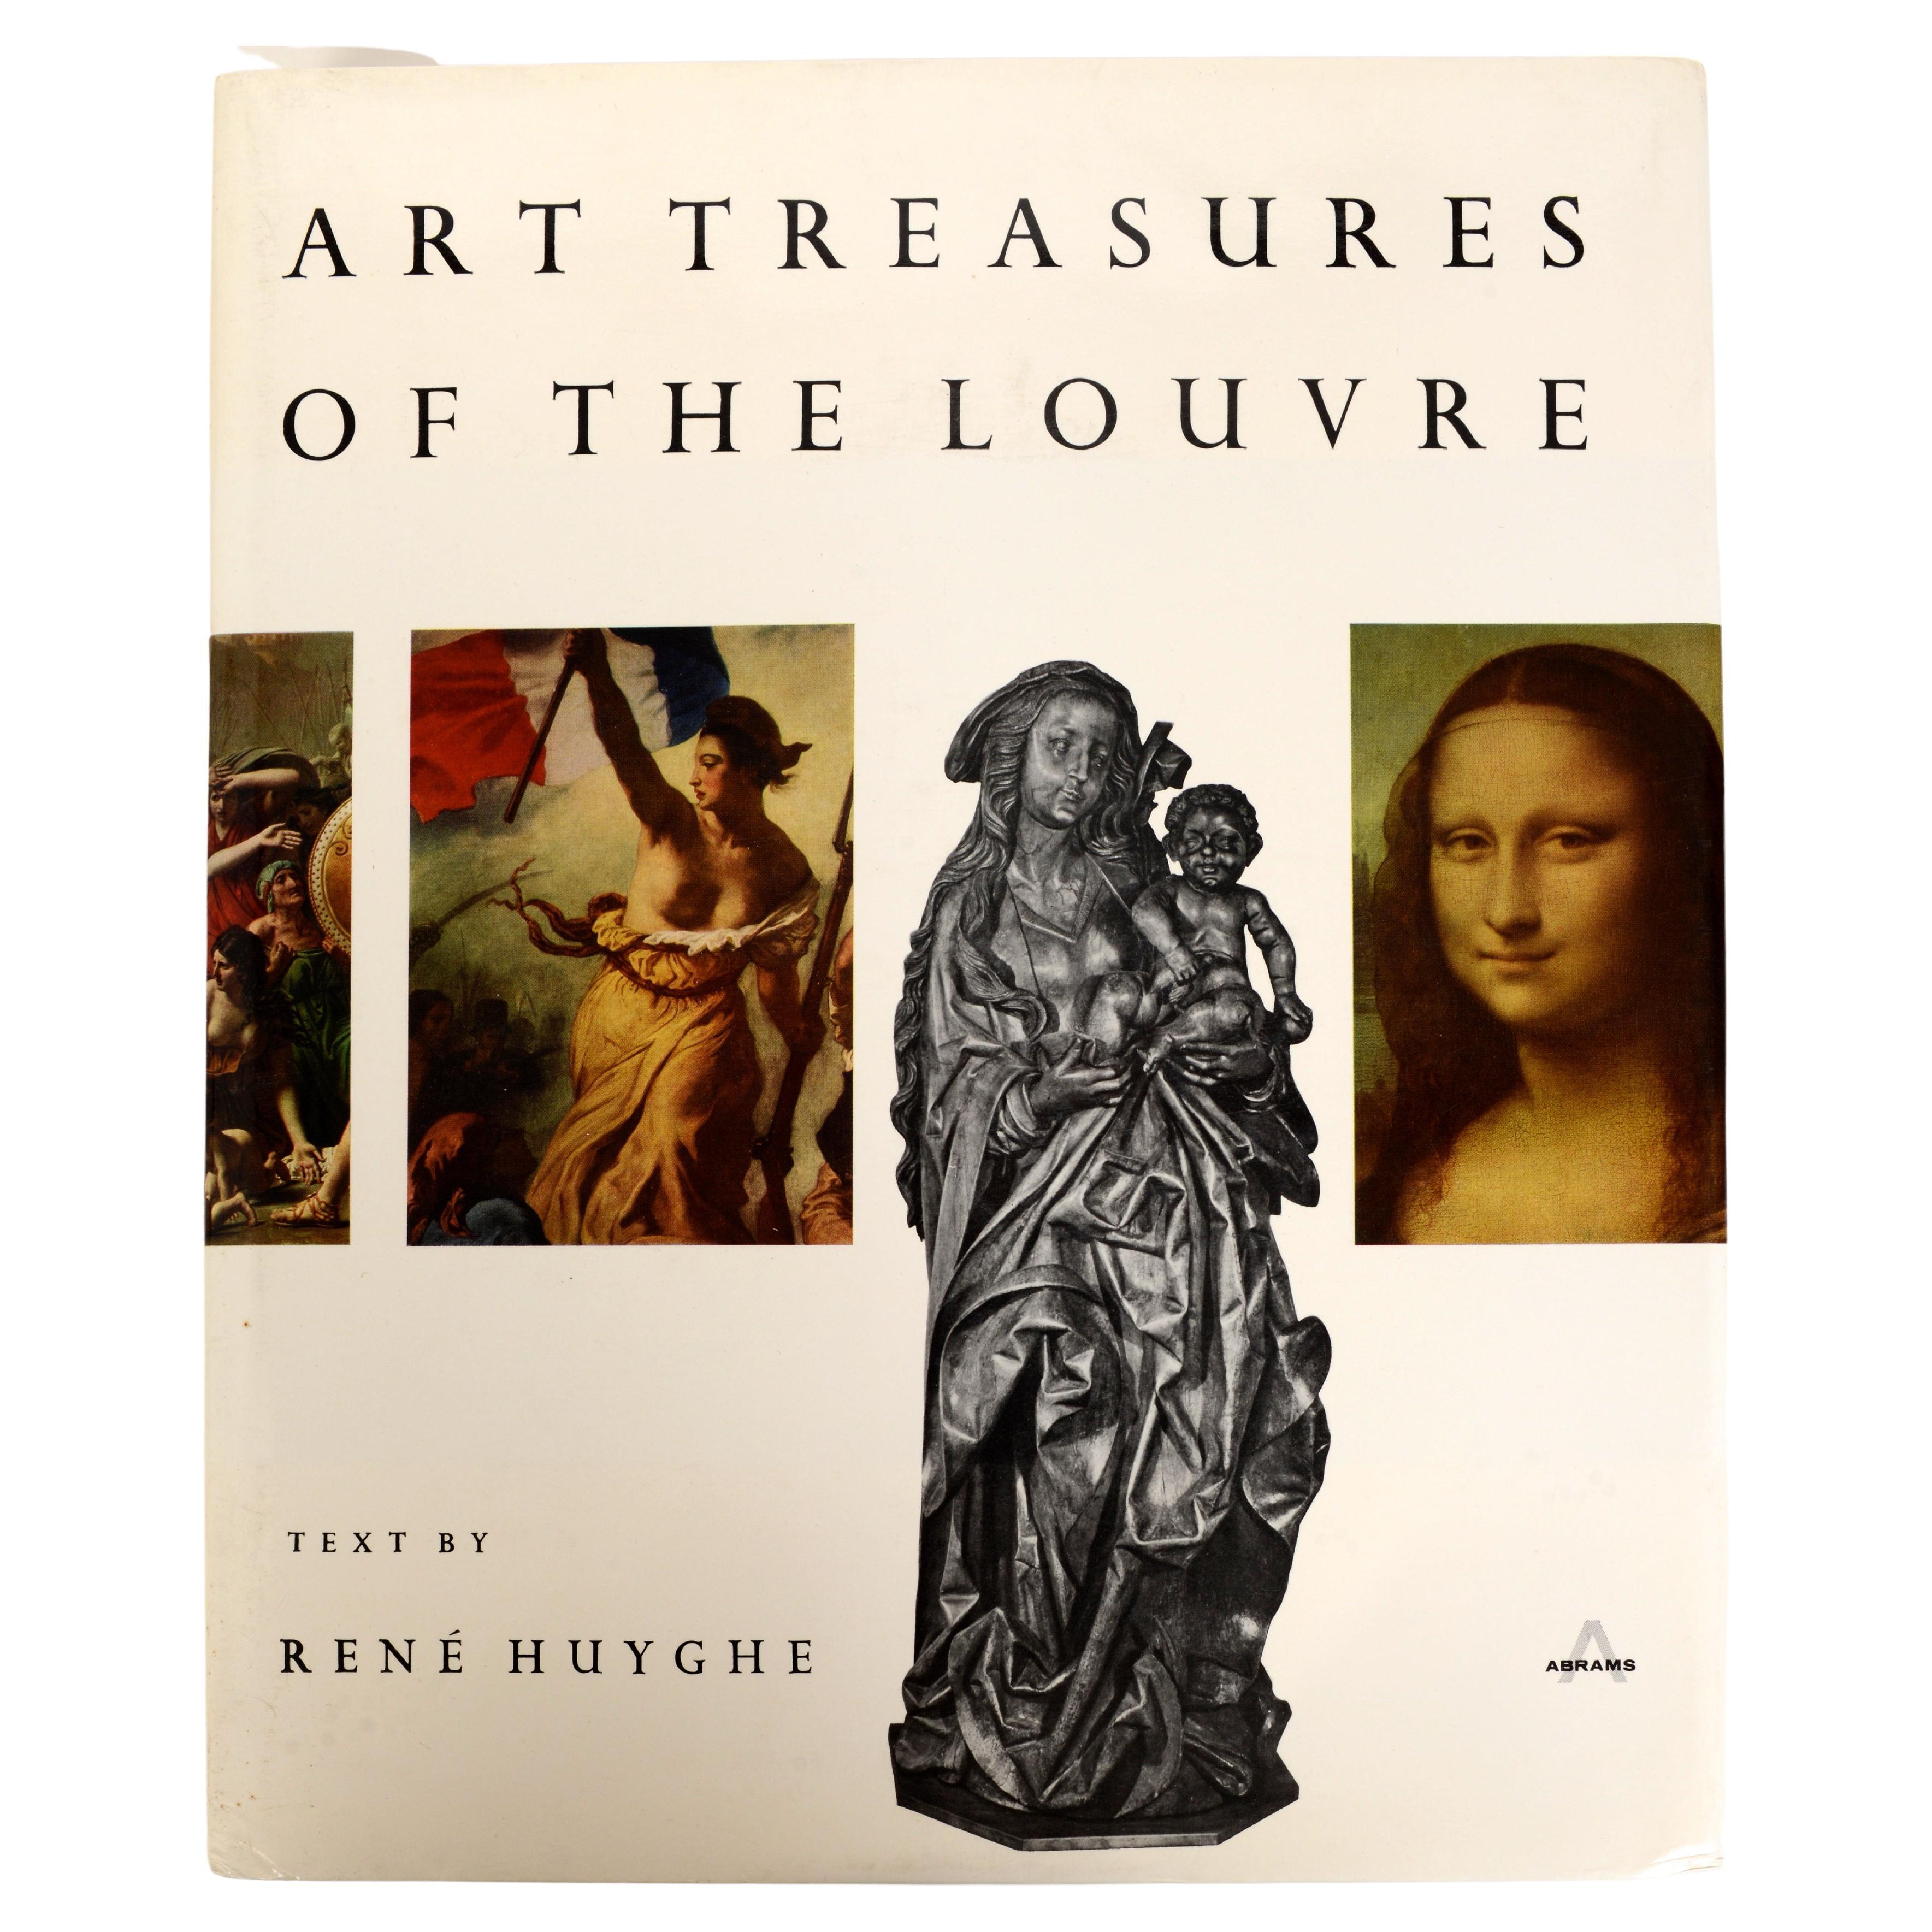 Art Treasures of the Louvre by René Huyghe, 1st Ed